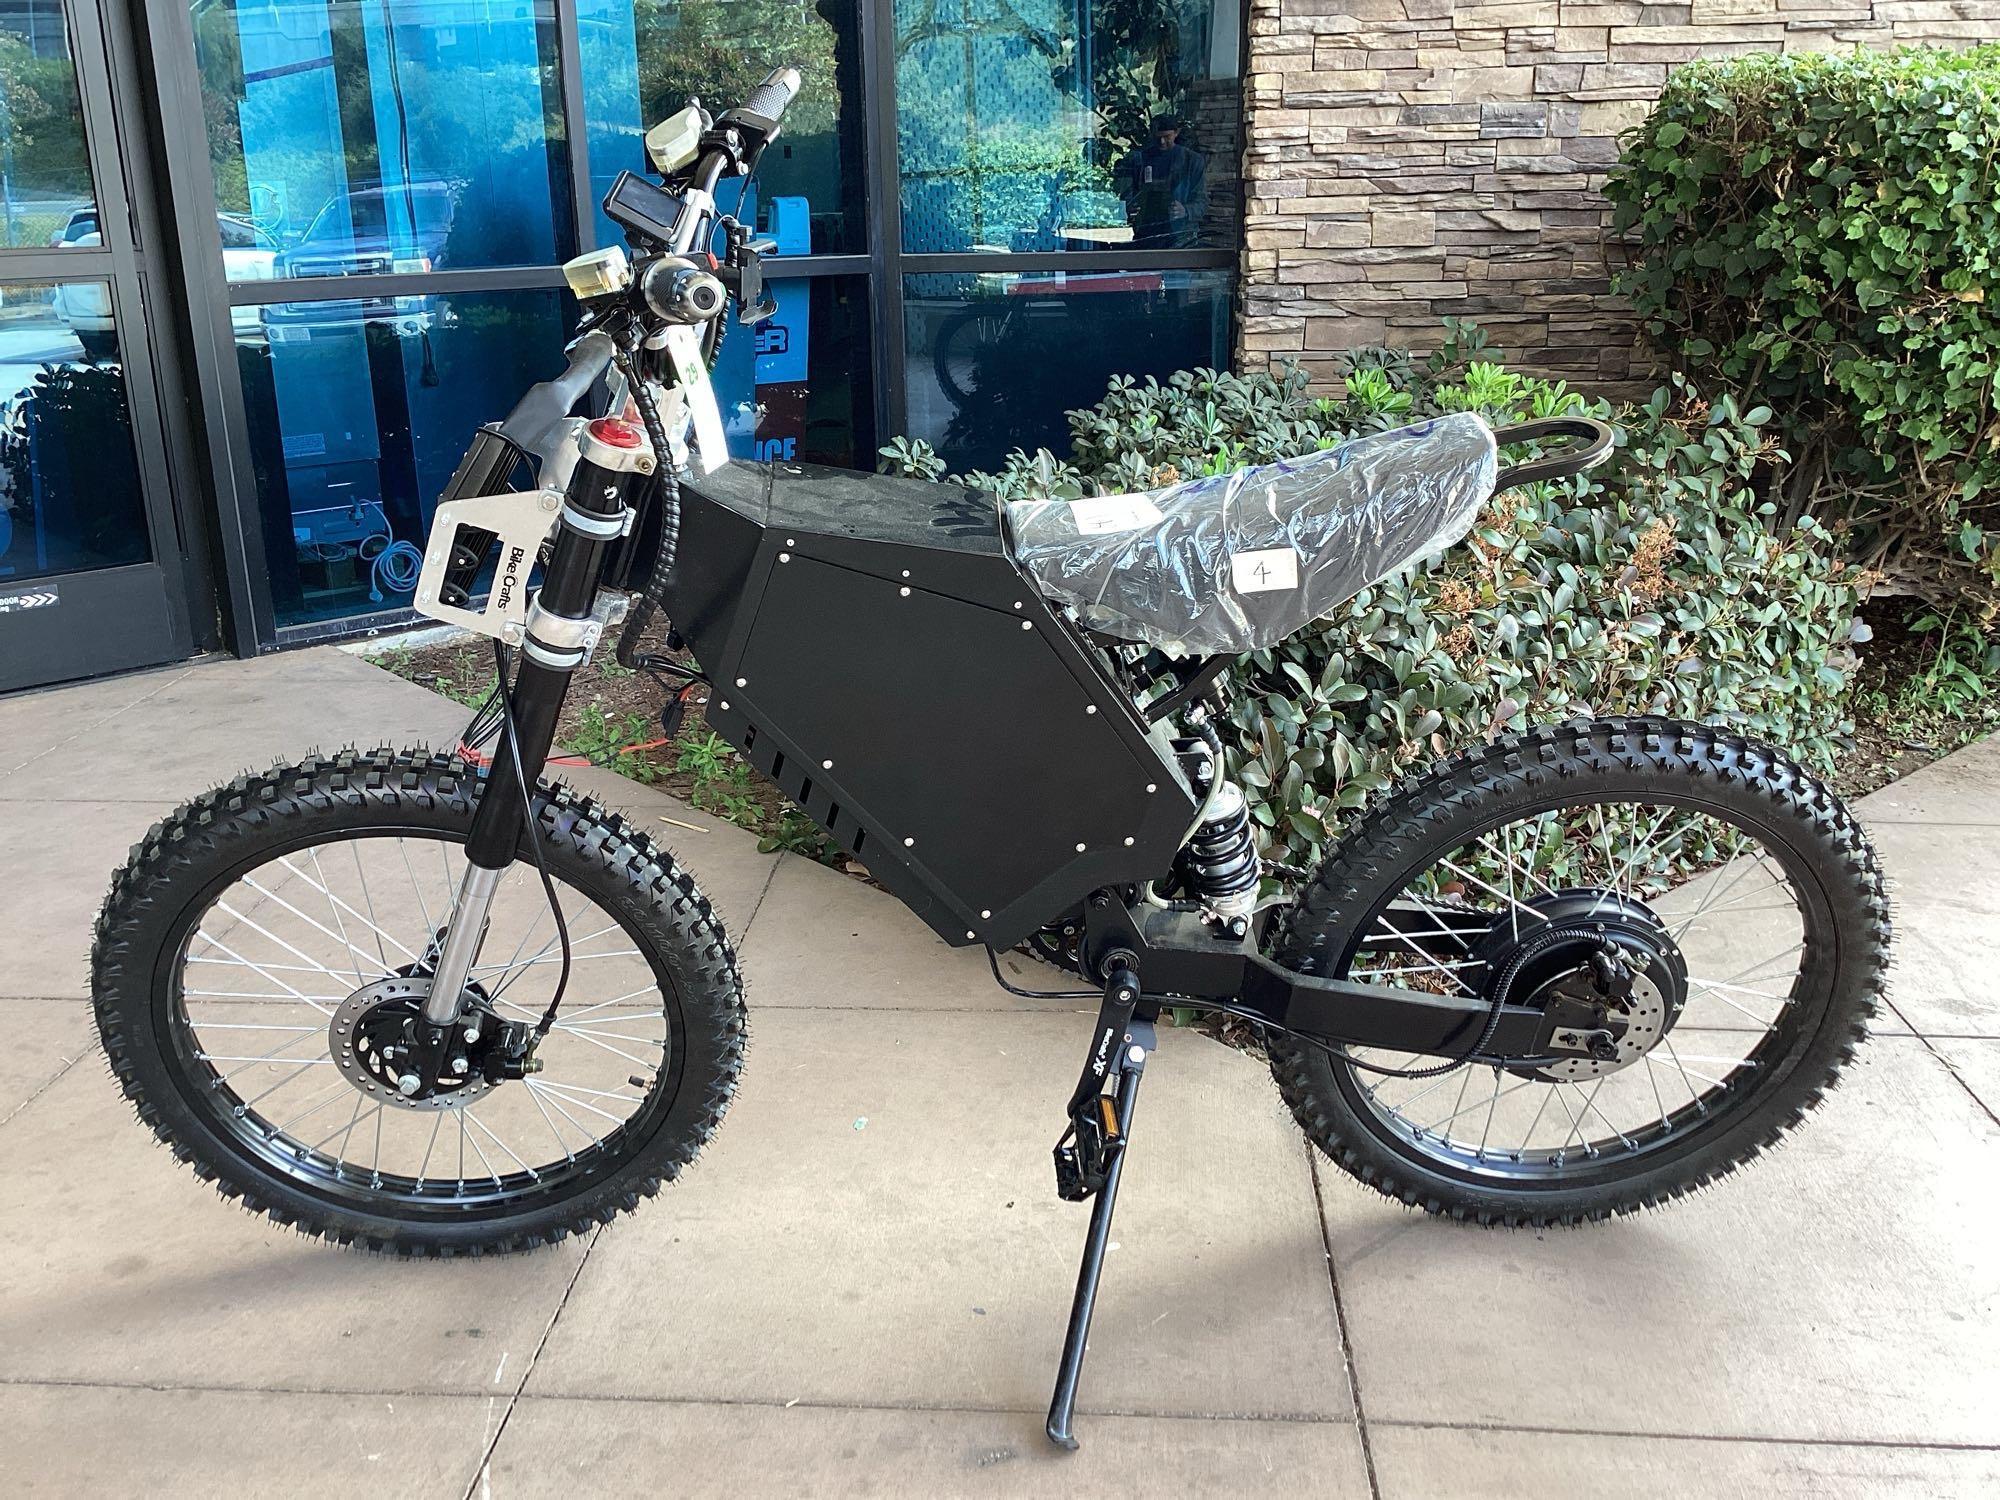 3000w 48v Adult Stealth Bomber Enduro Electric Off Road Bike*NO CHARGER*